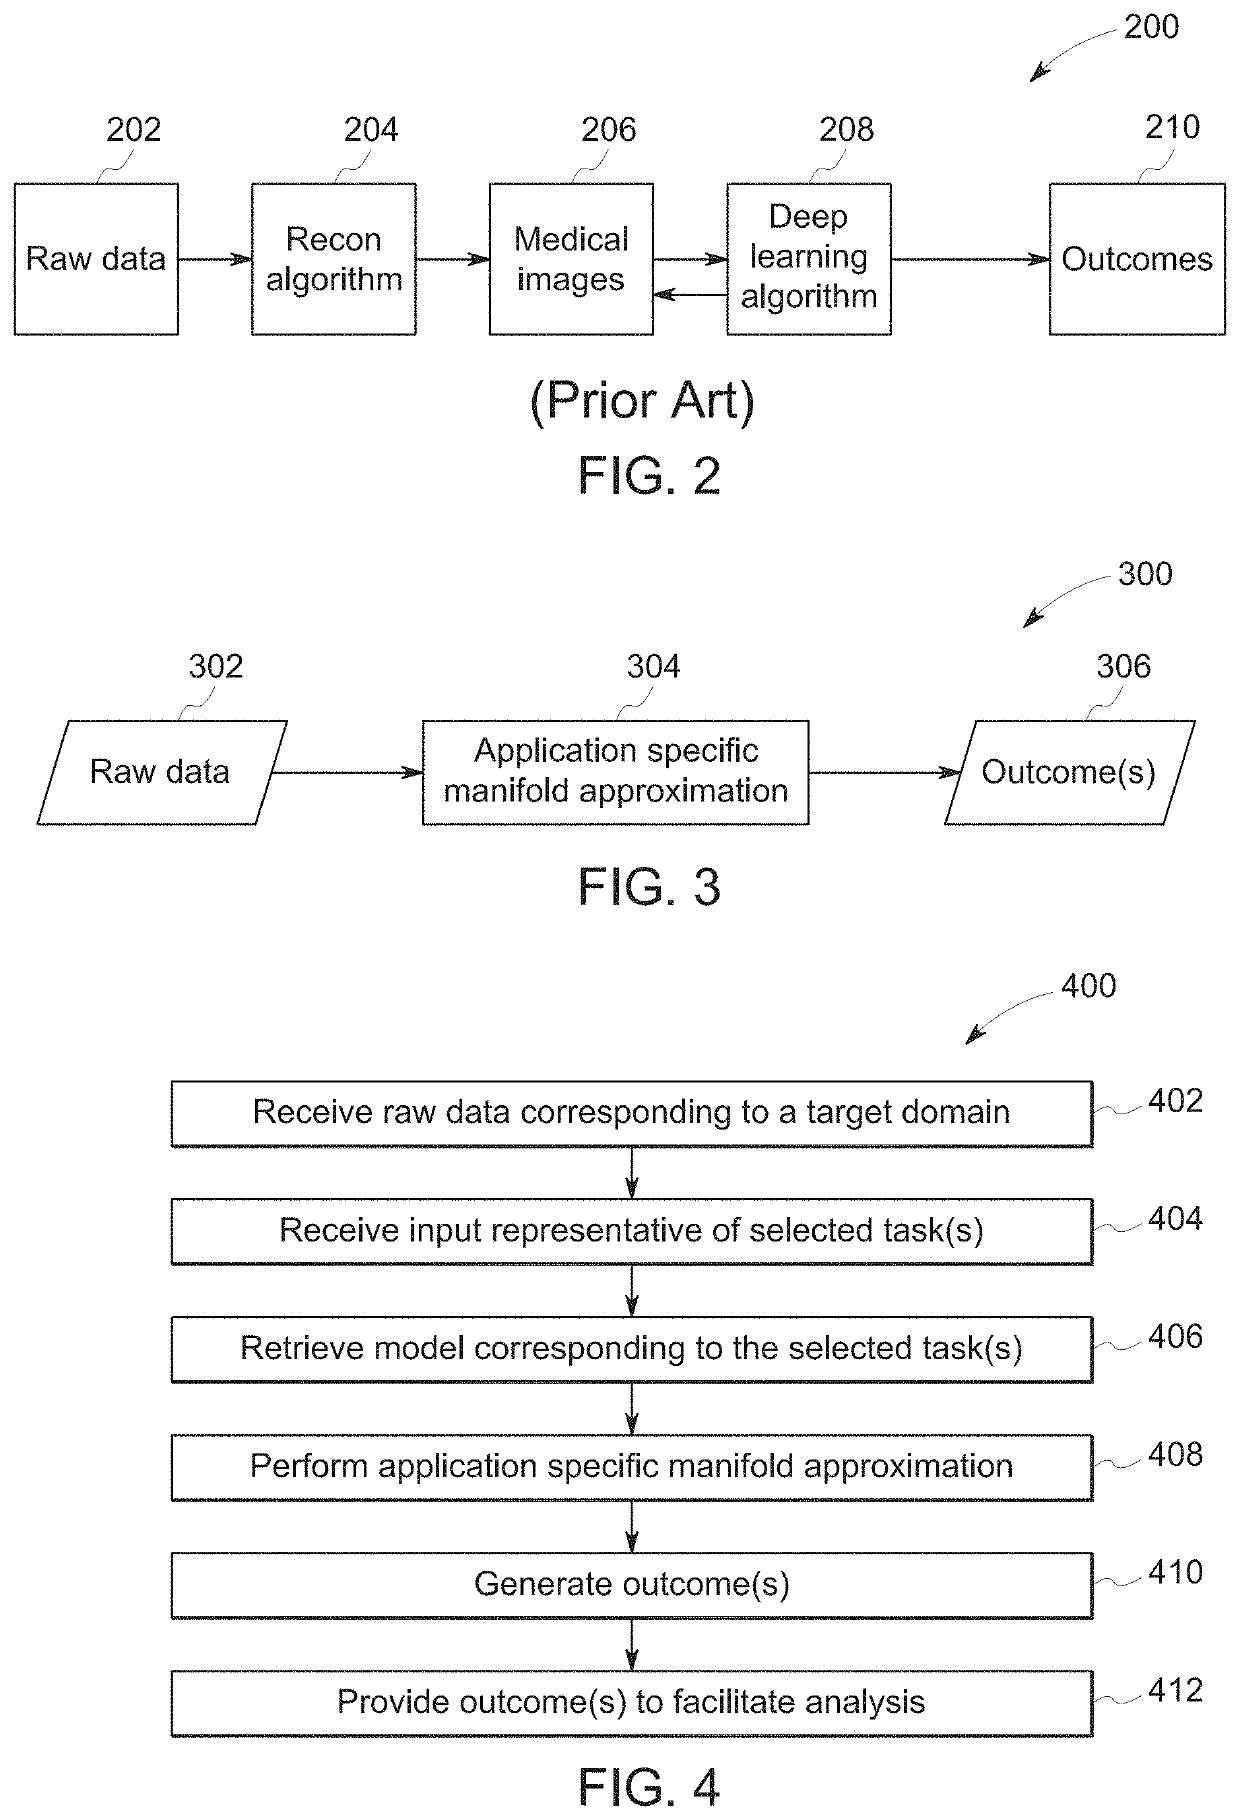 Systems and methods for predicting outcomes using raw data